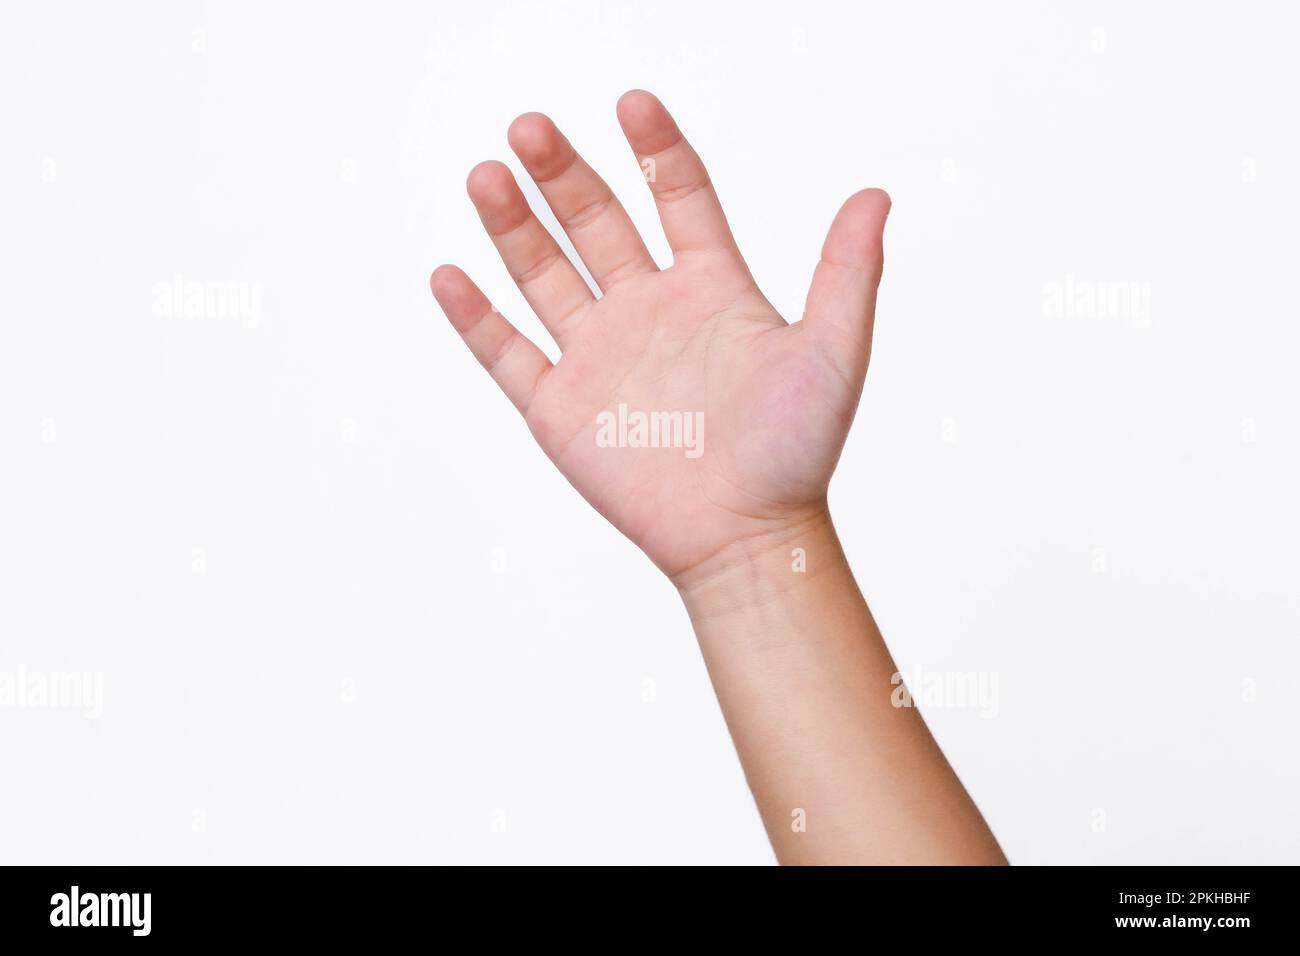 Child hand reaching up ready to help or receive isolated on white background. Helping hand outstretched for salvation. Stock Photo